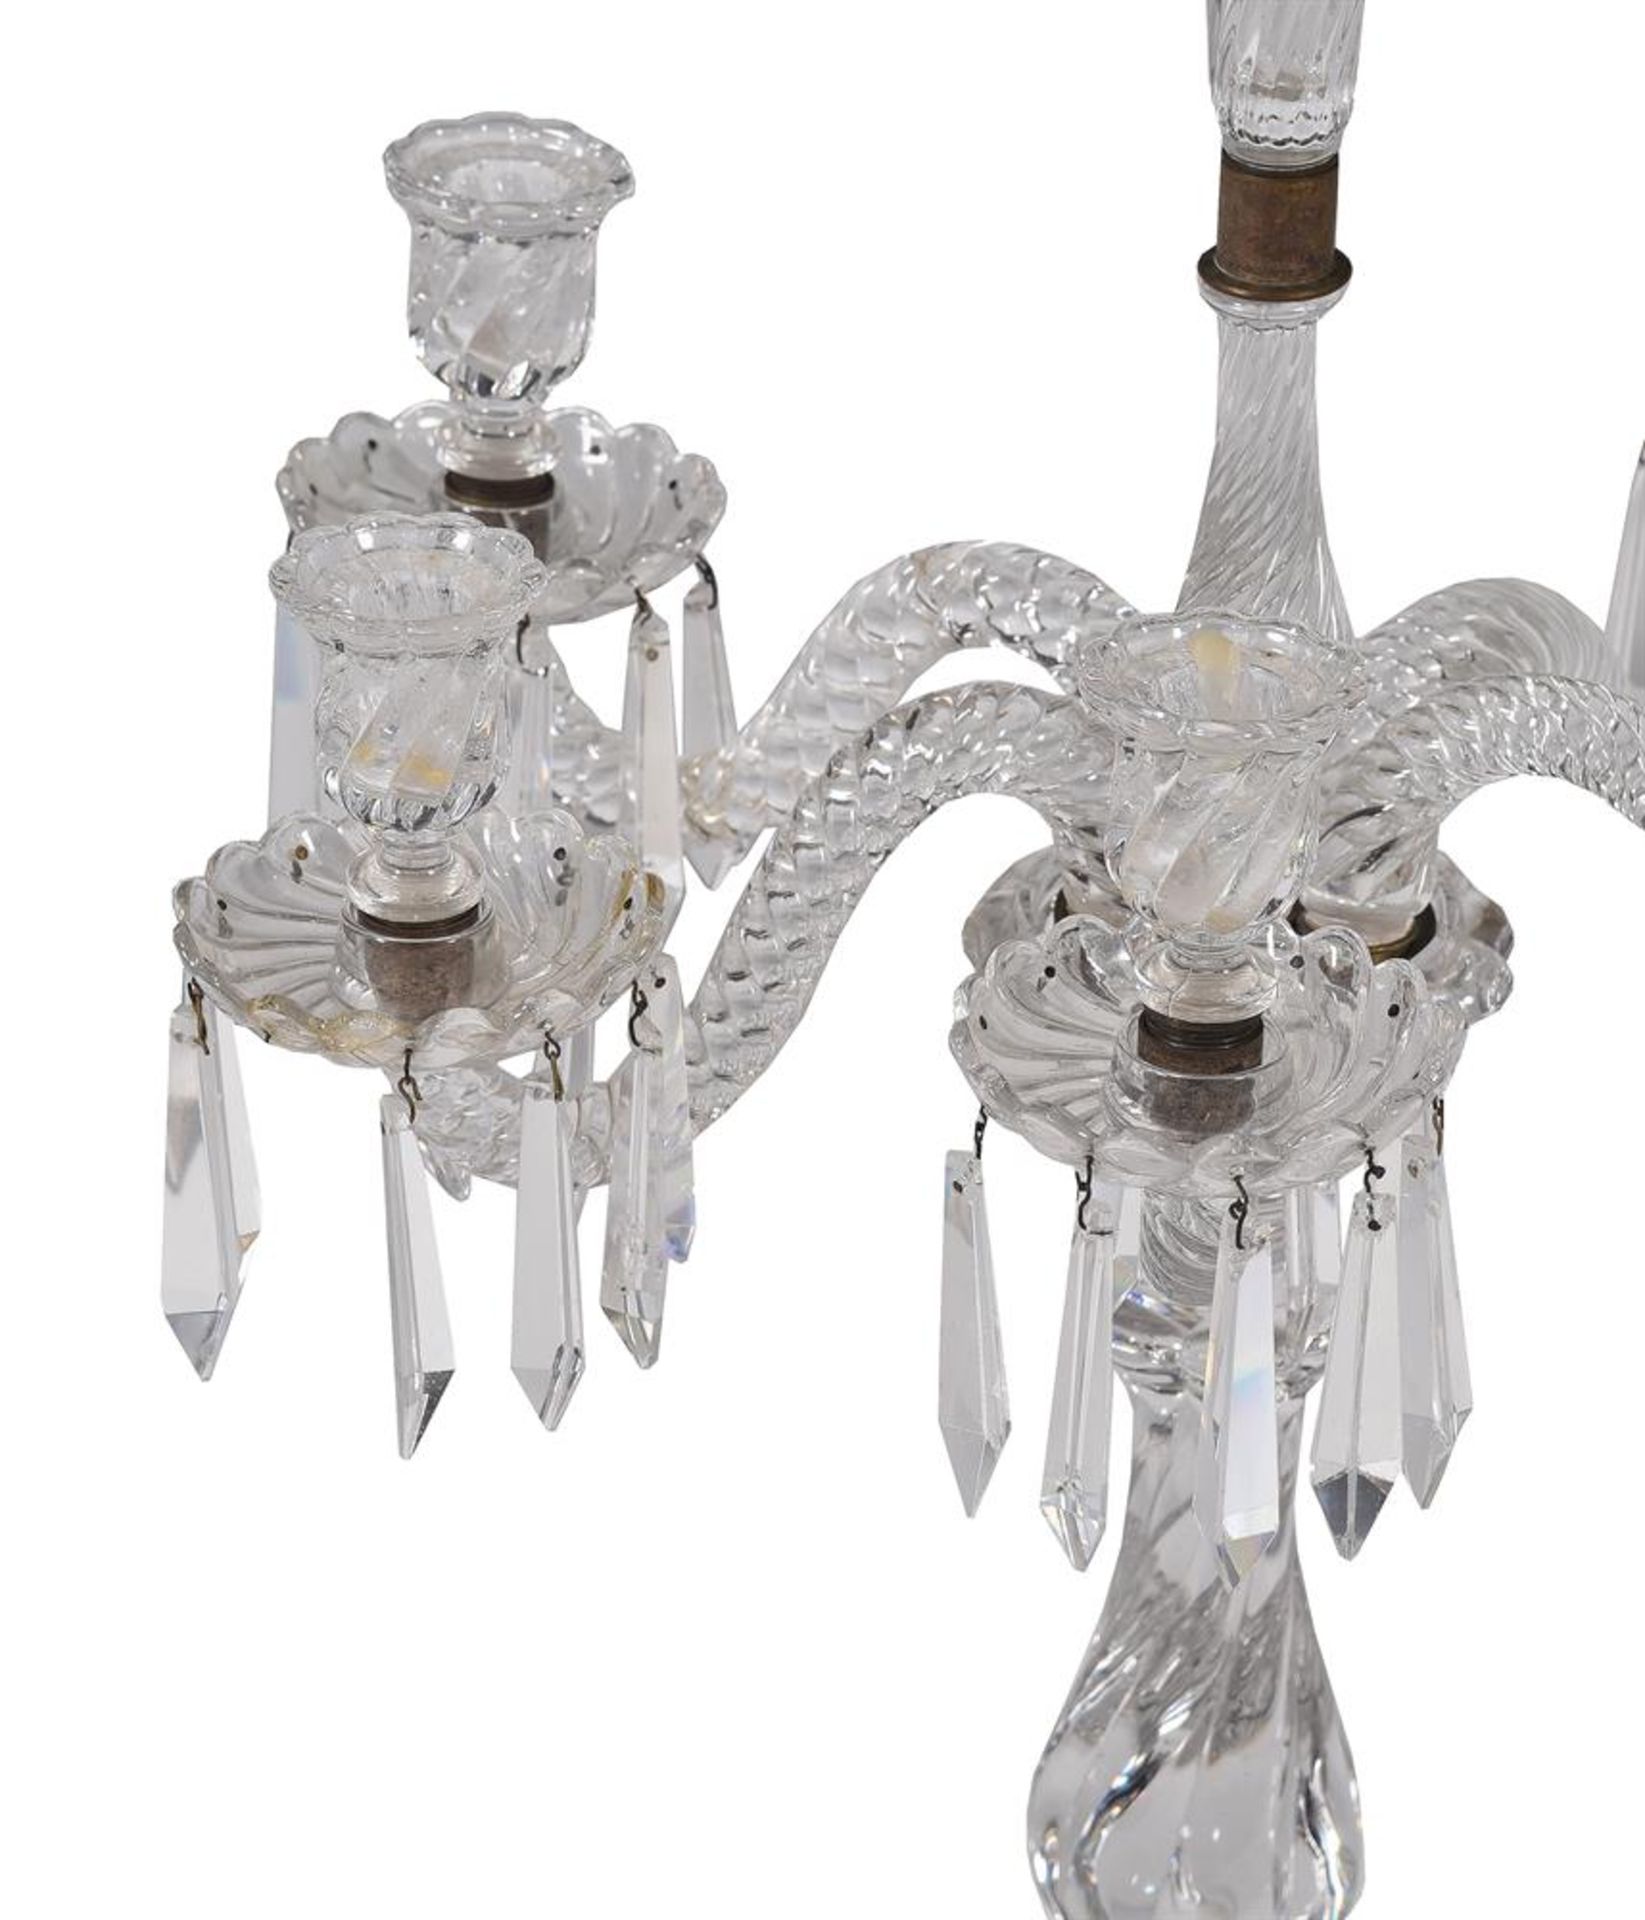 A PAIR OF BACCARAT FIVE LIGHT GLASS CANDELABRA, 20TH CENTURY - Image 3 of 6